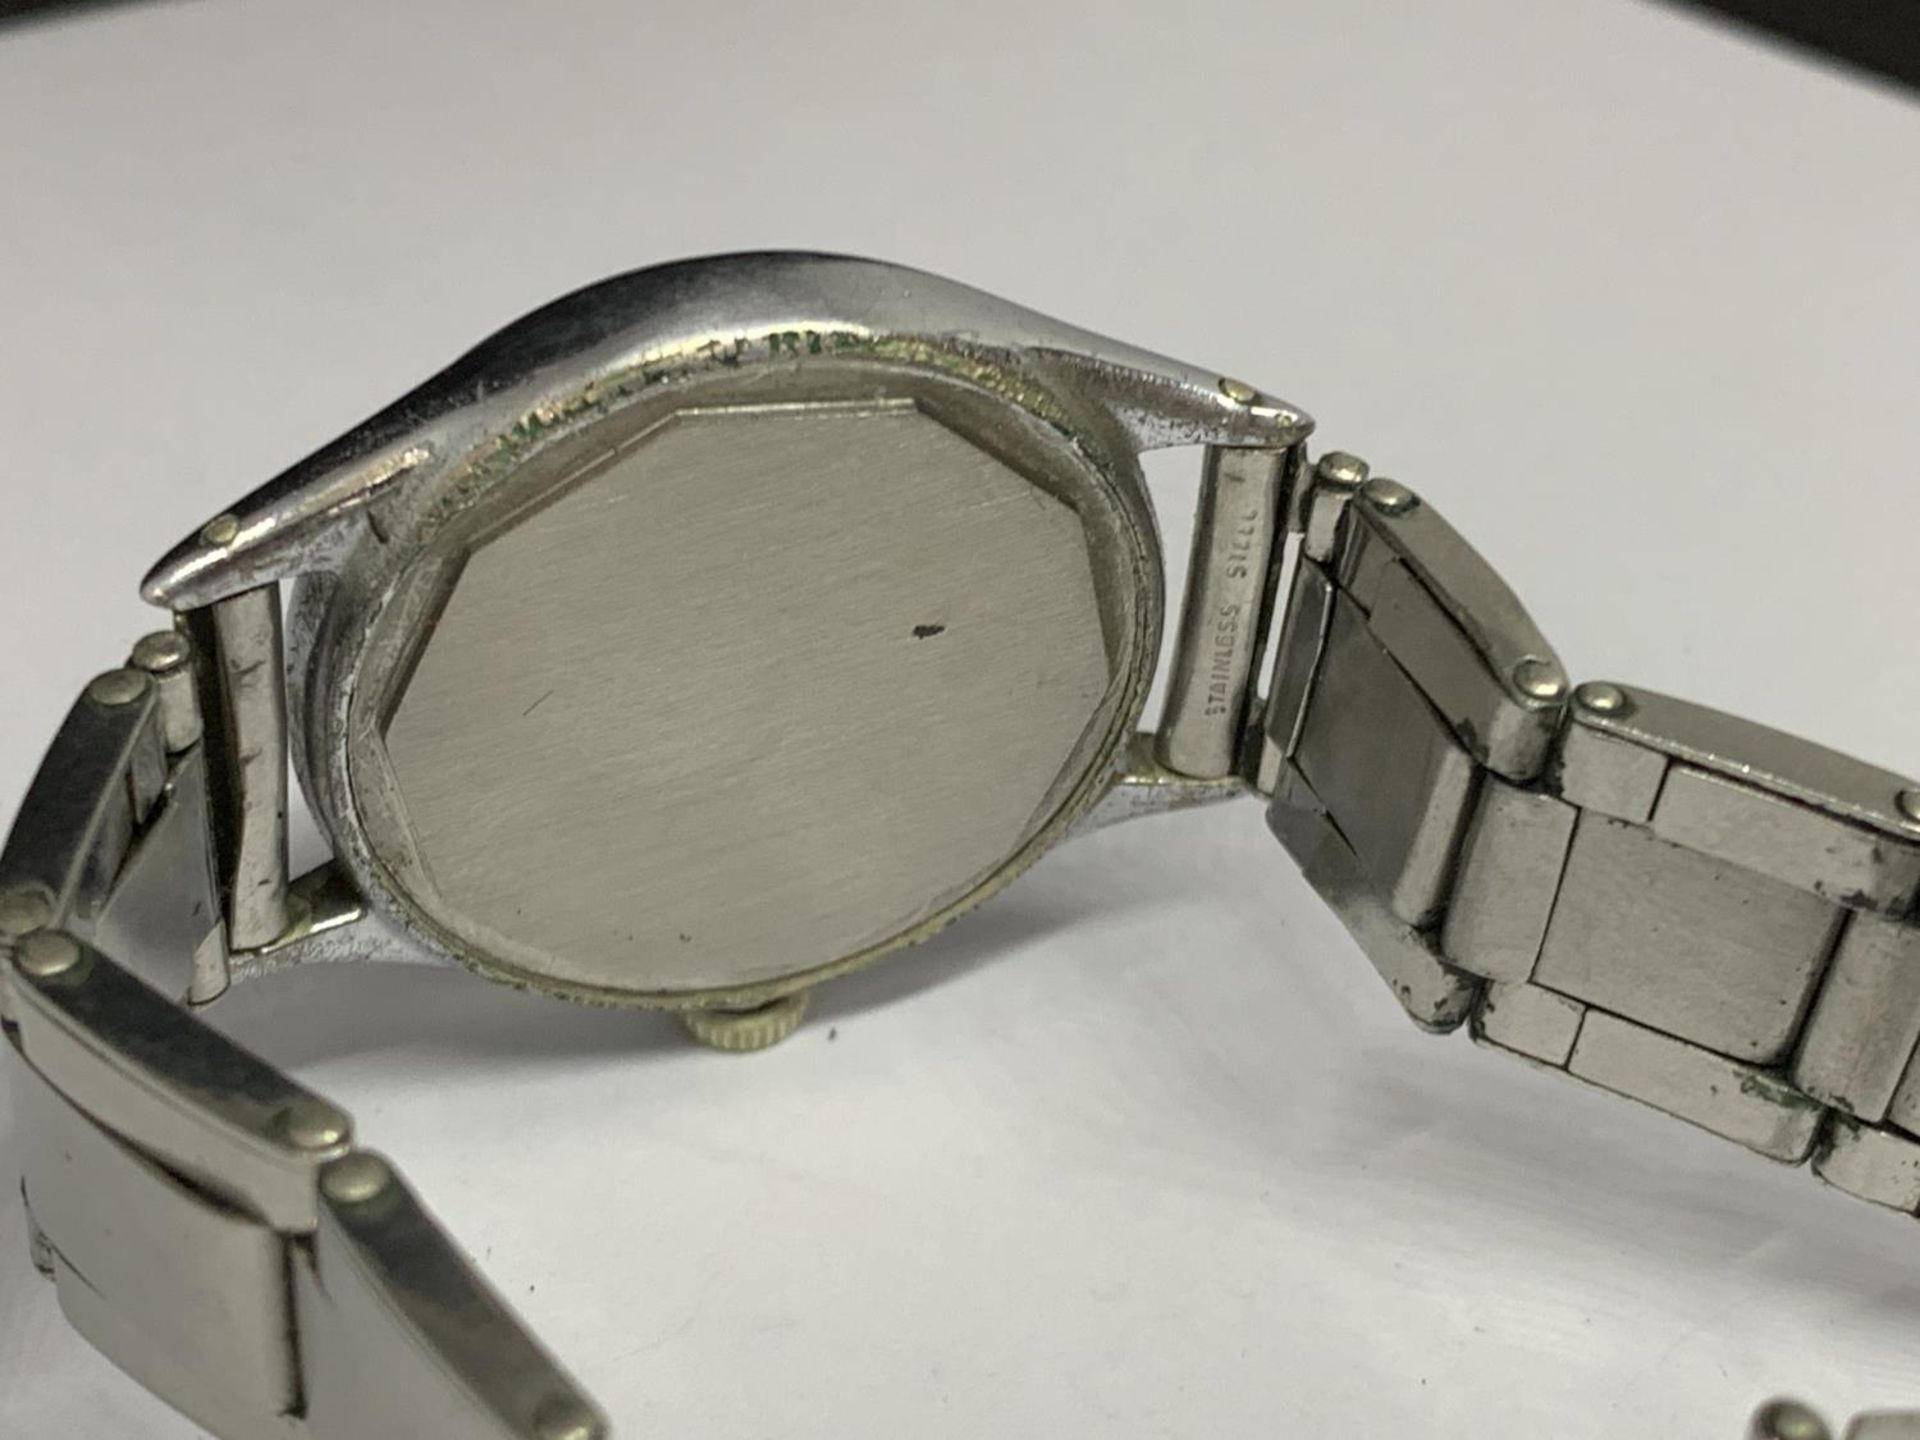 A WW2 BULOVA MILITARY ISSUE WATCH 1940'S - Image 4 of 4